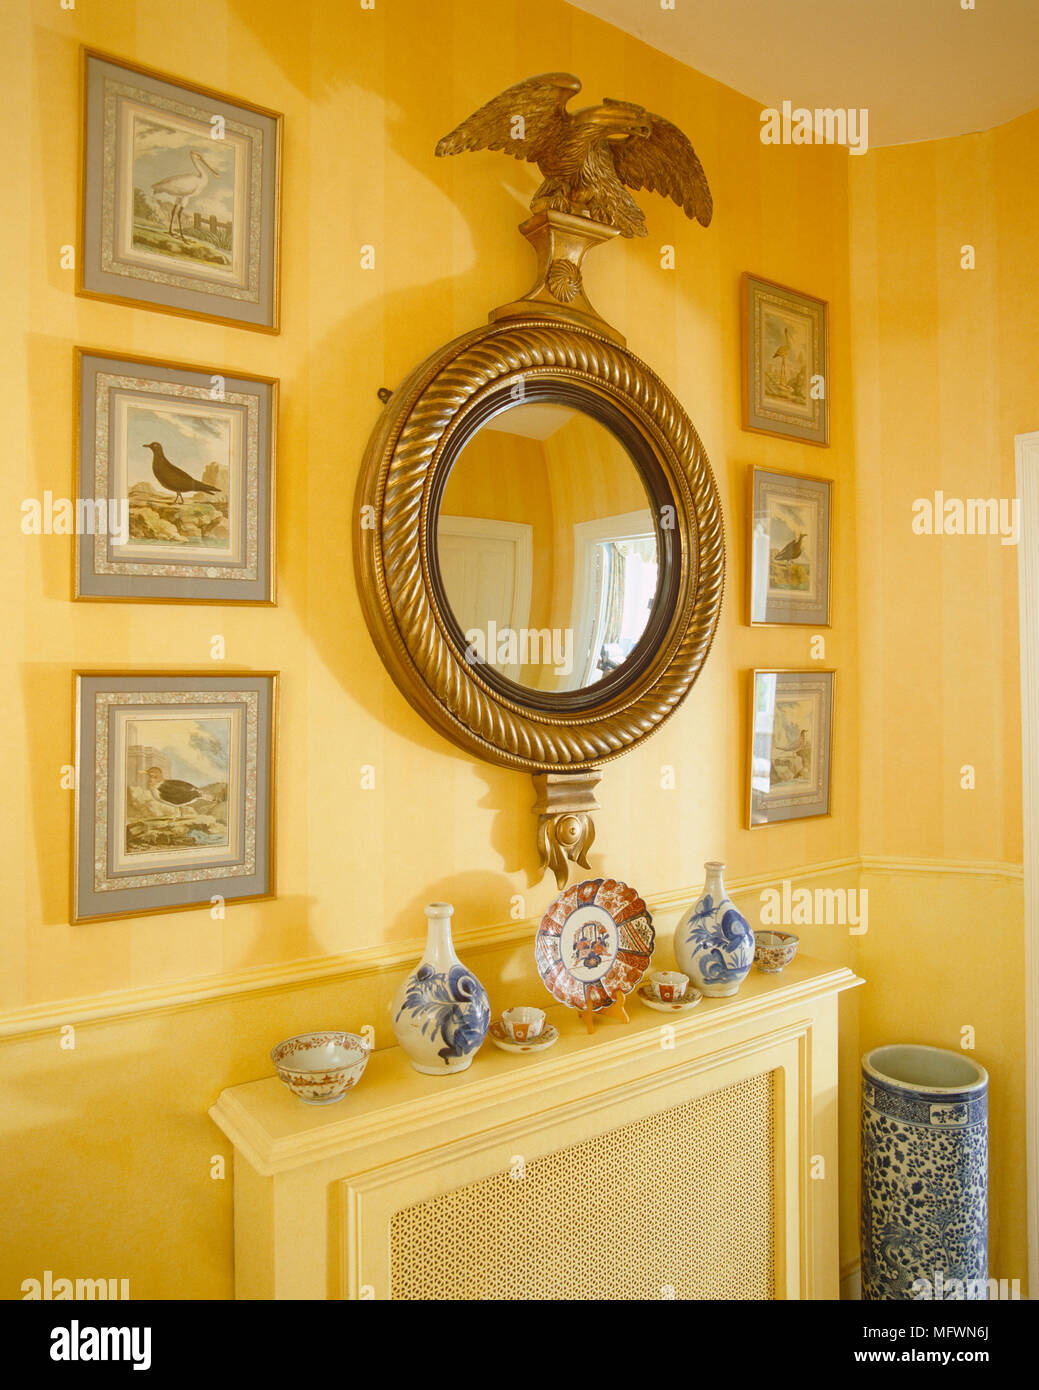 Ornate round gilt mirror above radiator cover on yellow wall Stock Photo